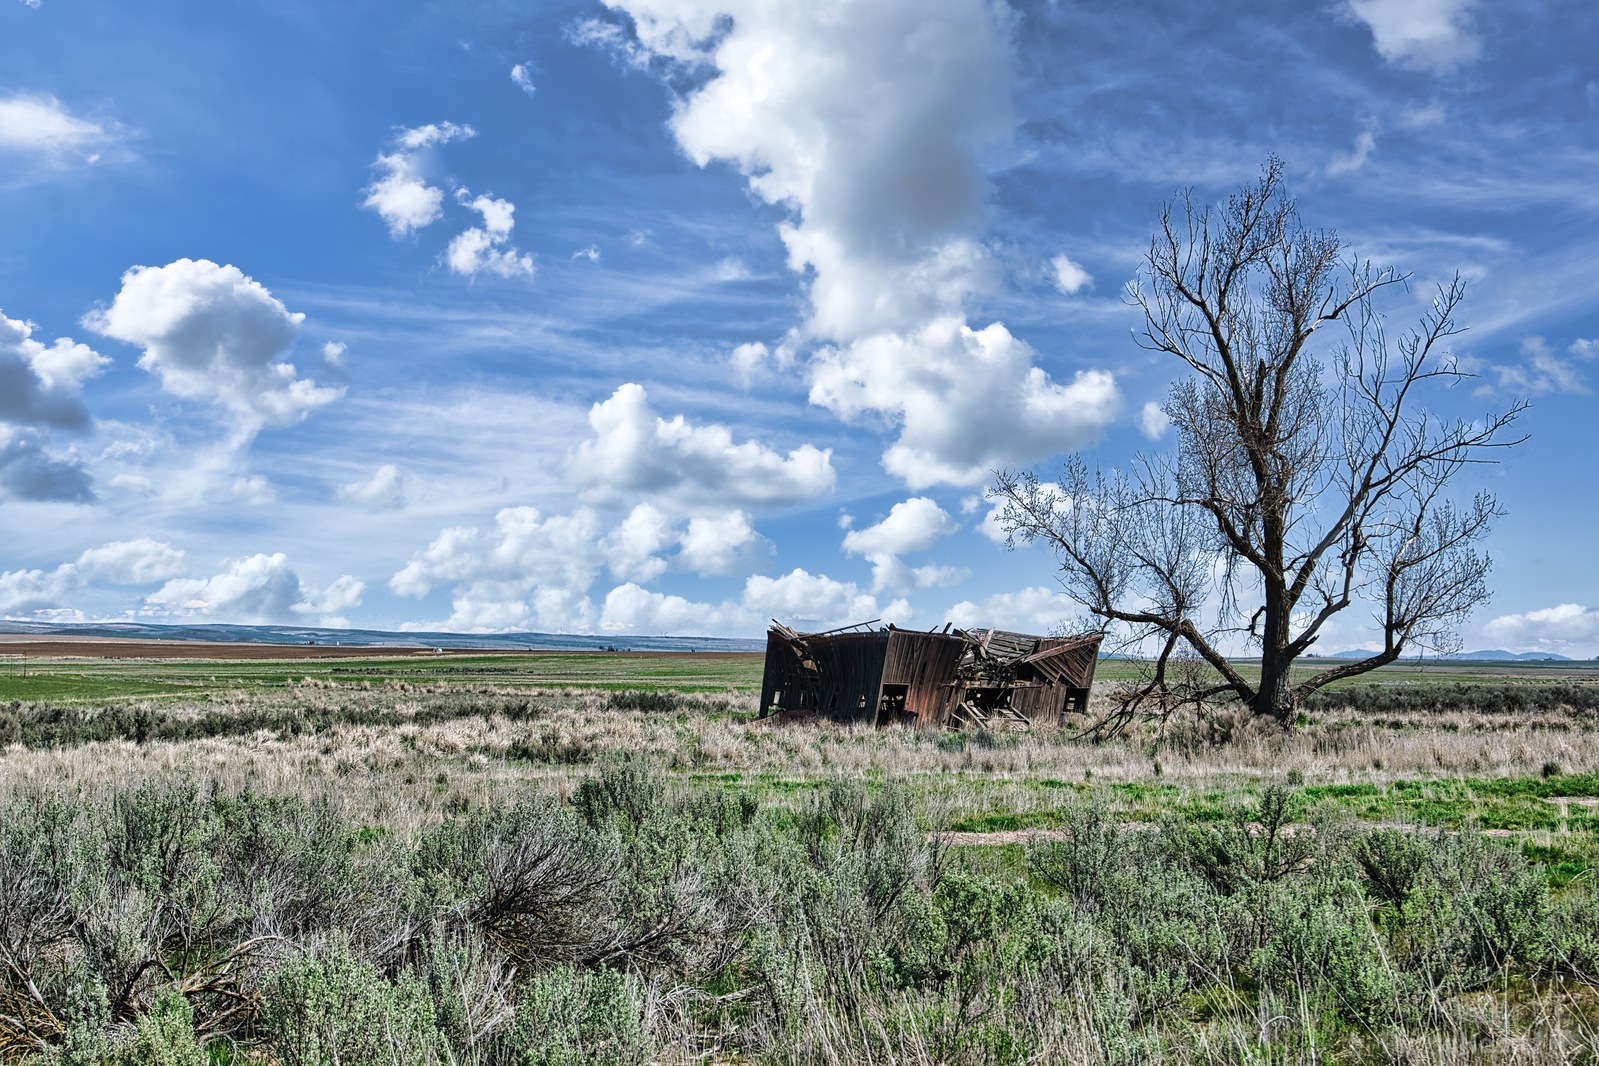 Image of Lincoln County Collapsing Barn by Steve West